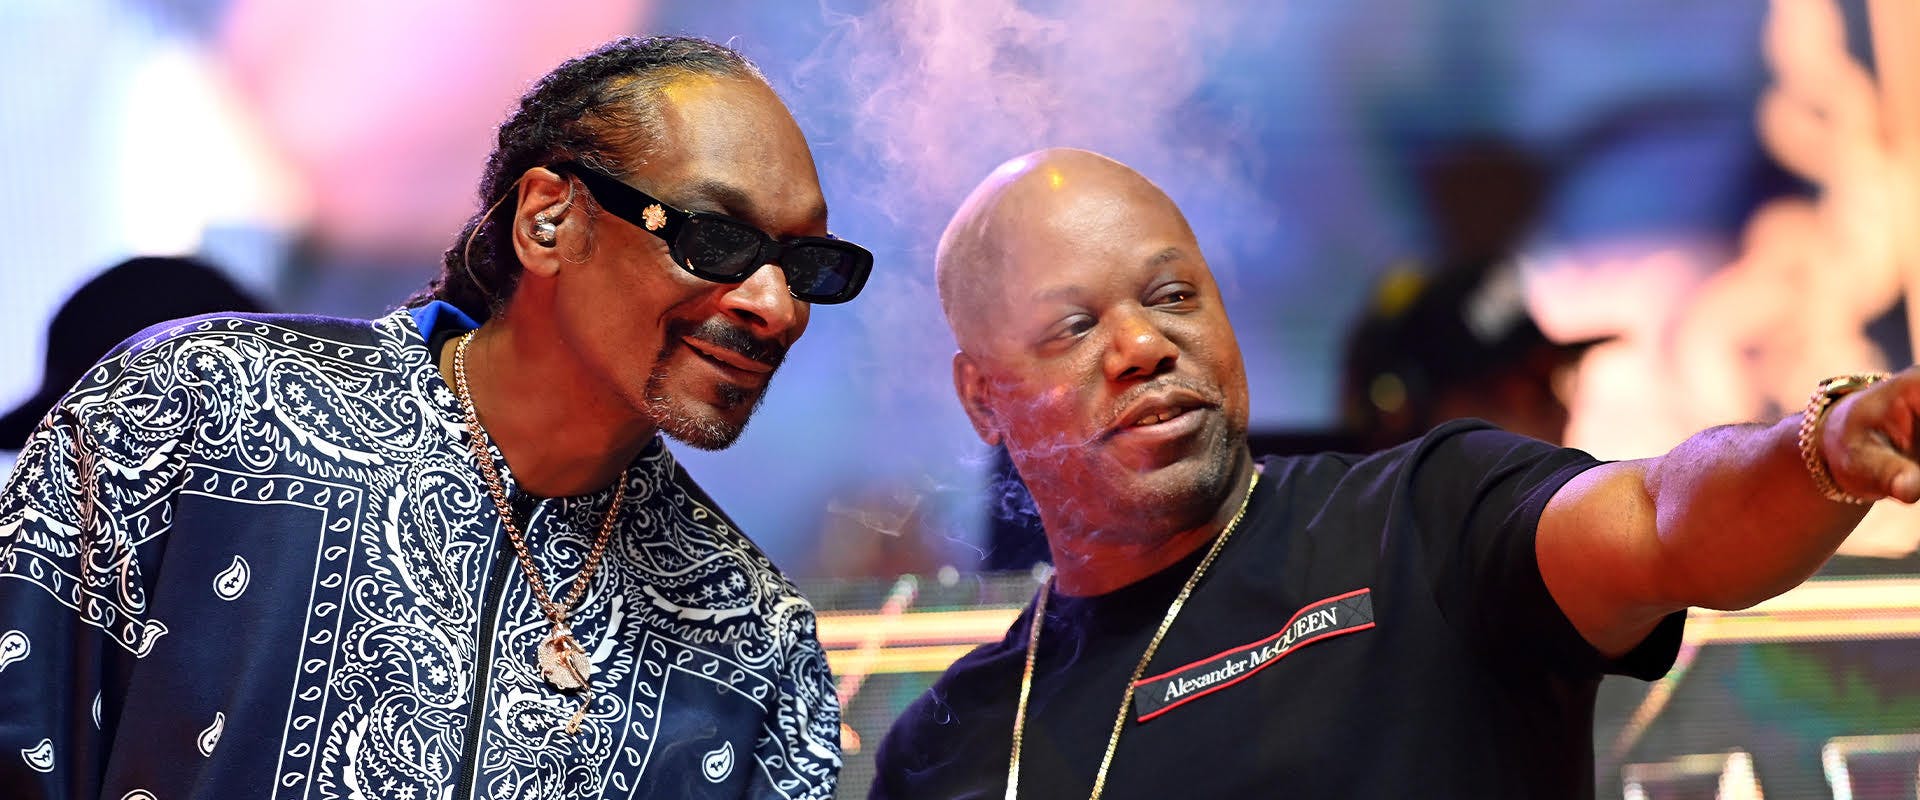 Snoop Dogg and Too Short of hip-hop supergroup Mt. Westmore performs at Rupp Arena on November 20, 2021 in Lexington, Kentucky.